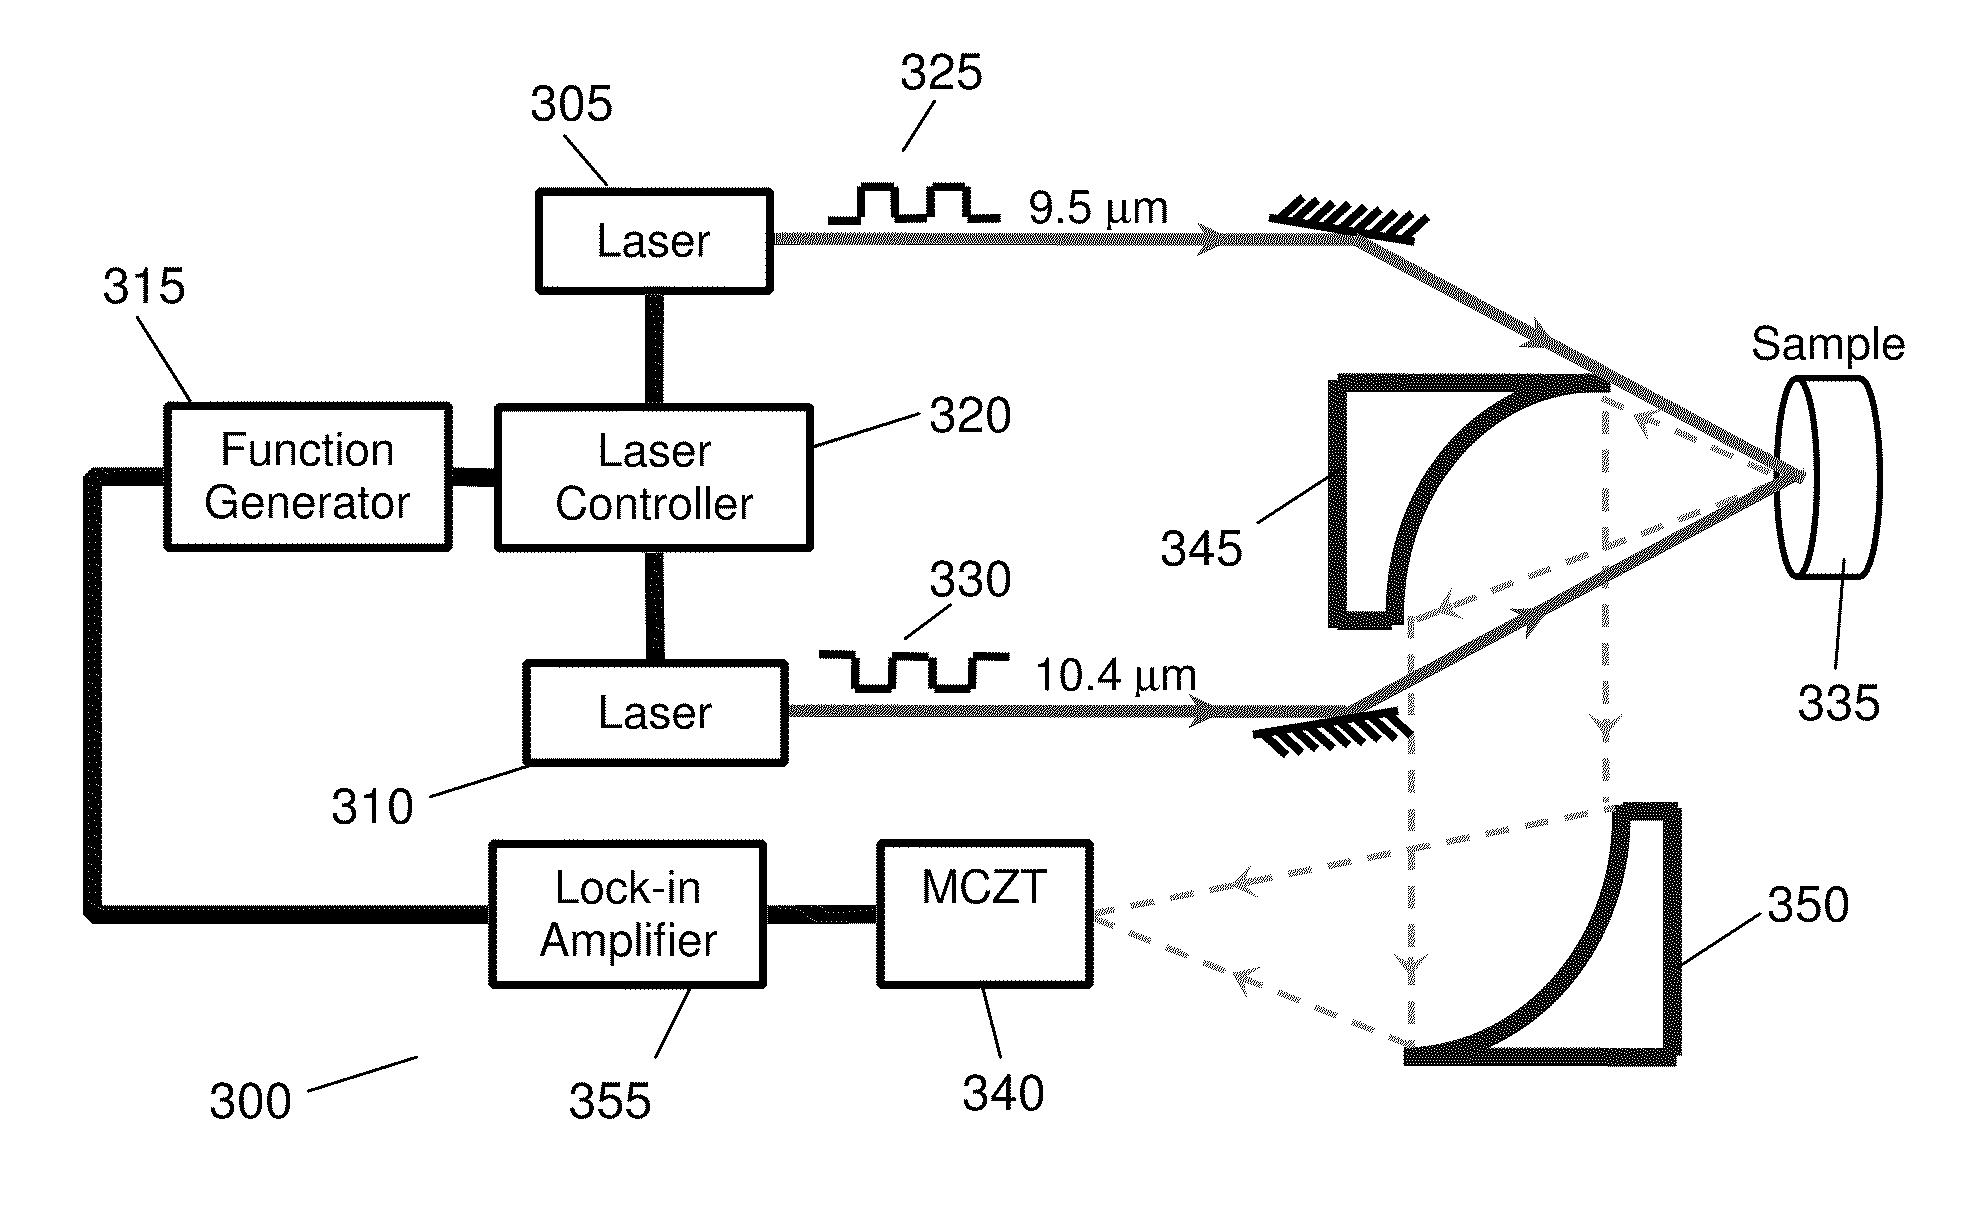 Method of performing wavelength modulated differential laser photothermal radiometry with high sensitivity